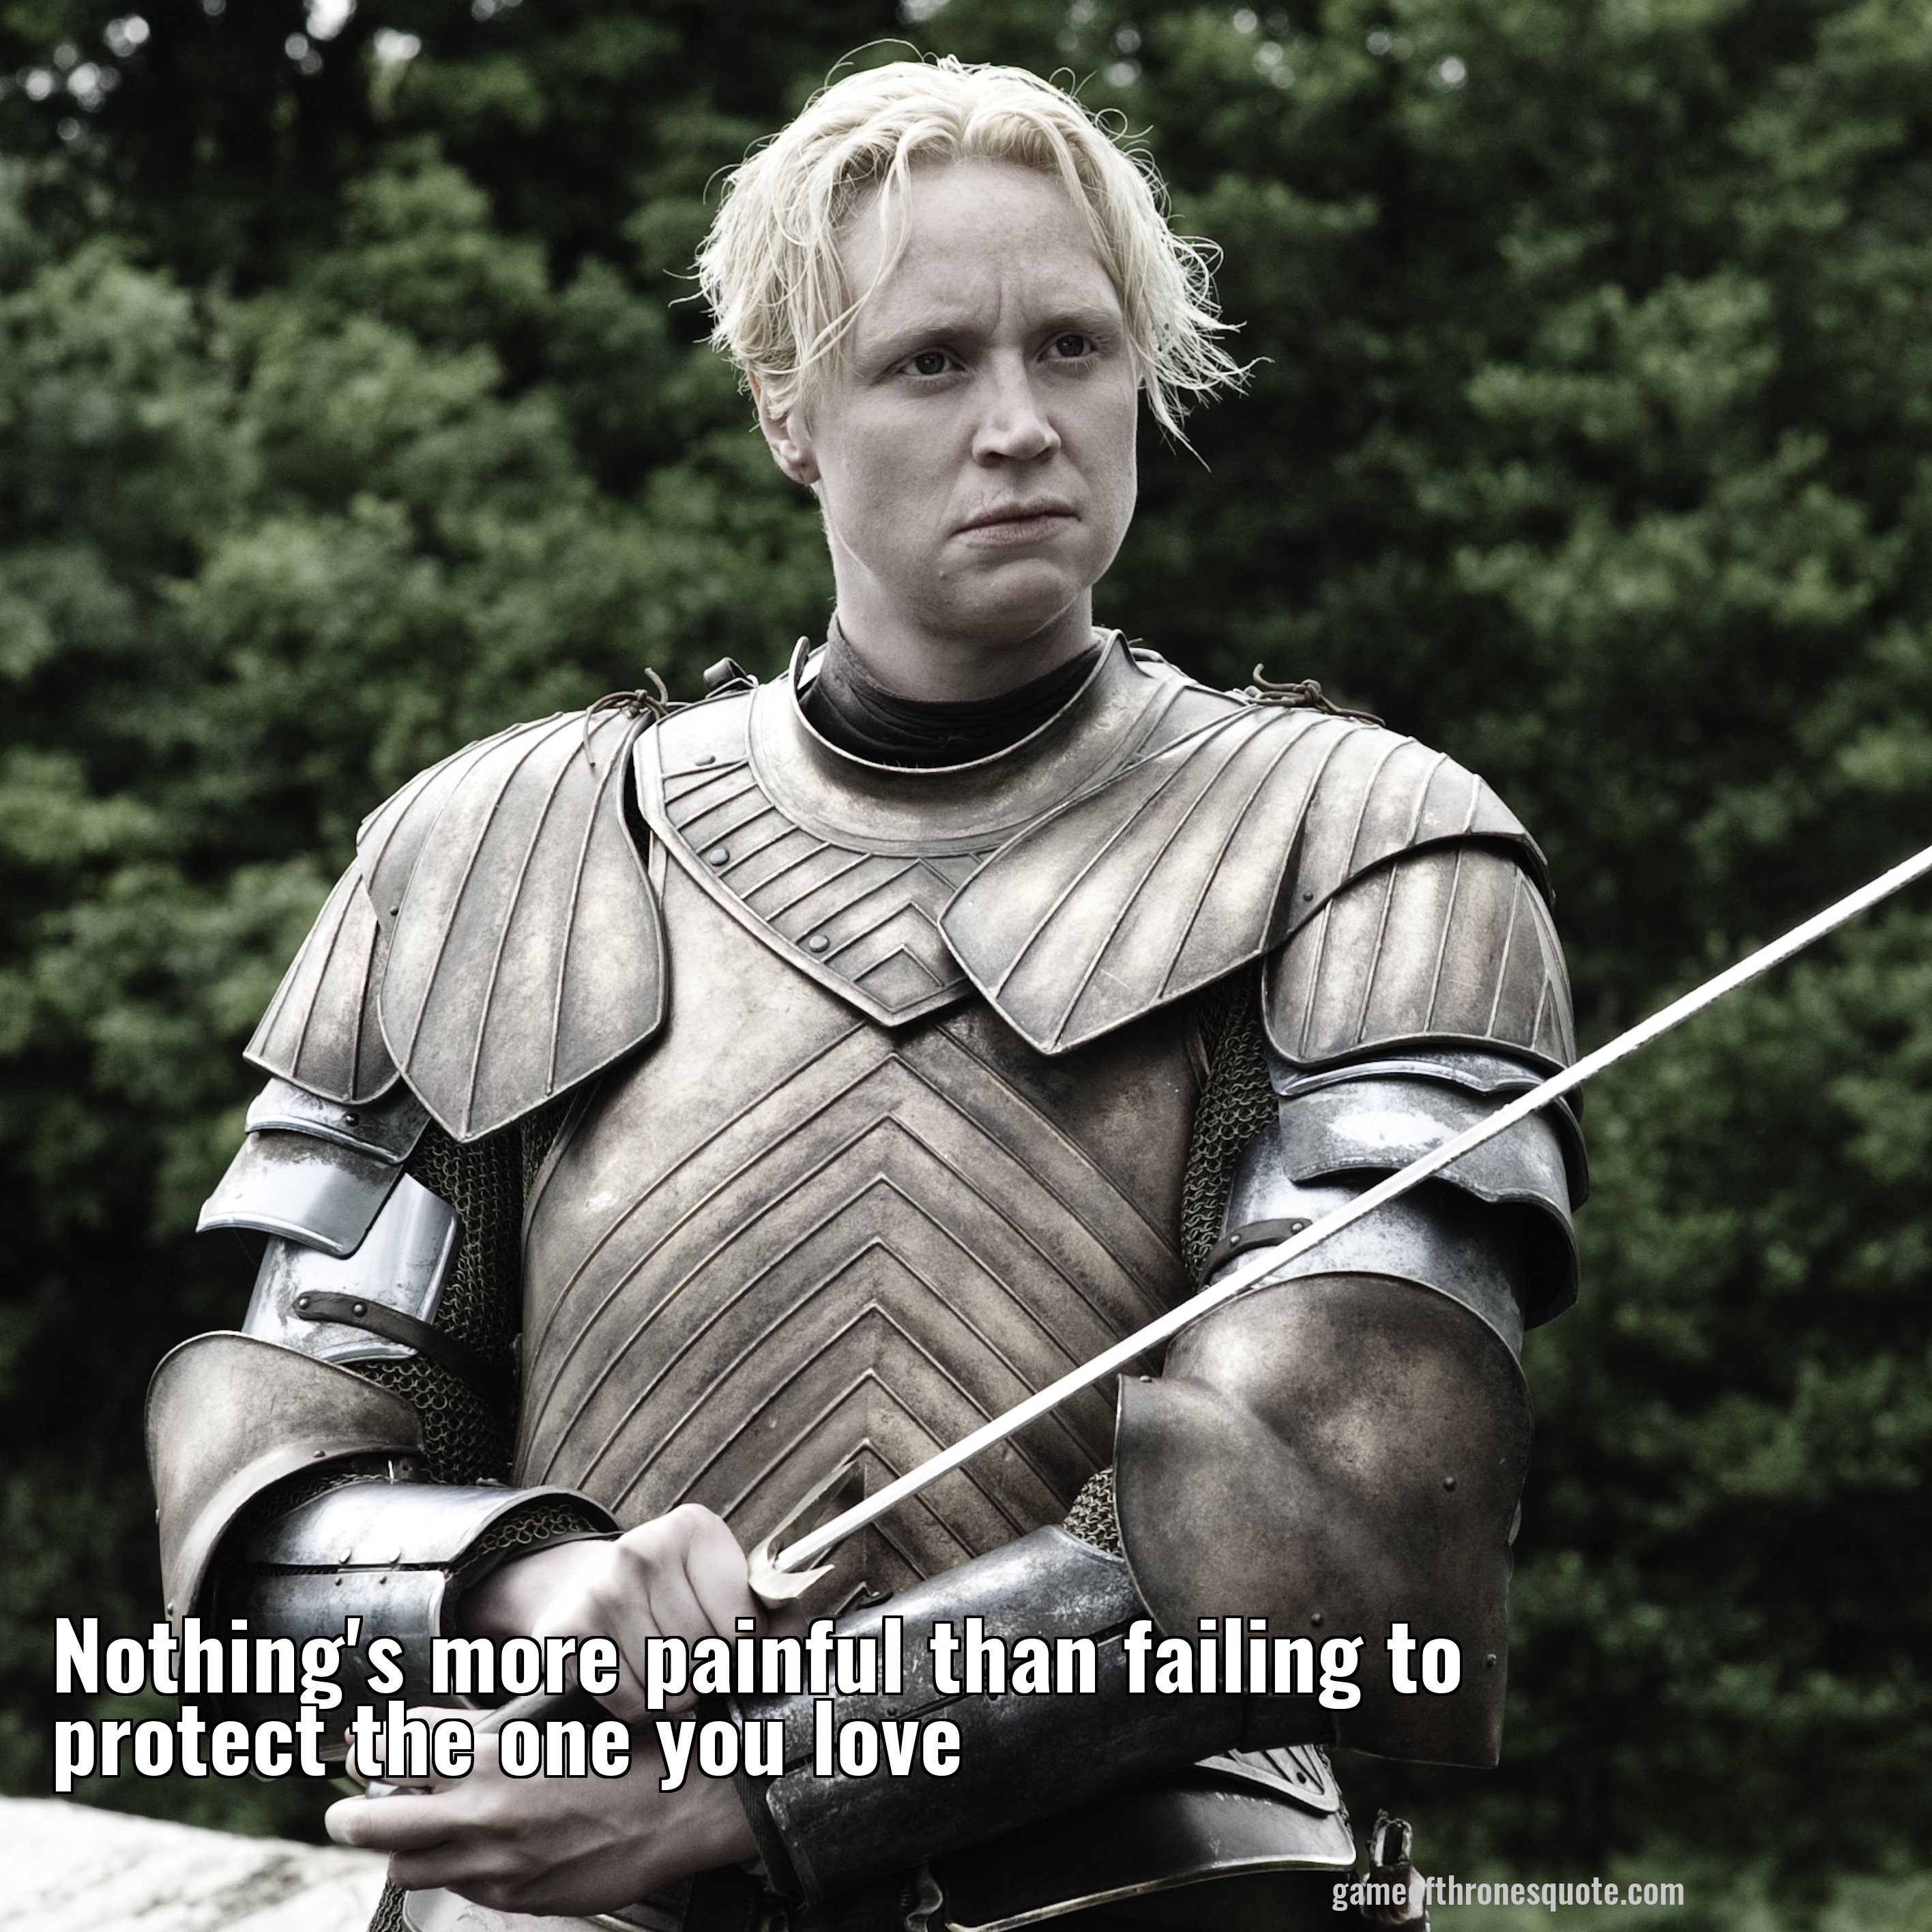 Nothing's more painful than failing to protect the one you love